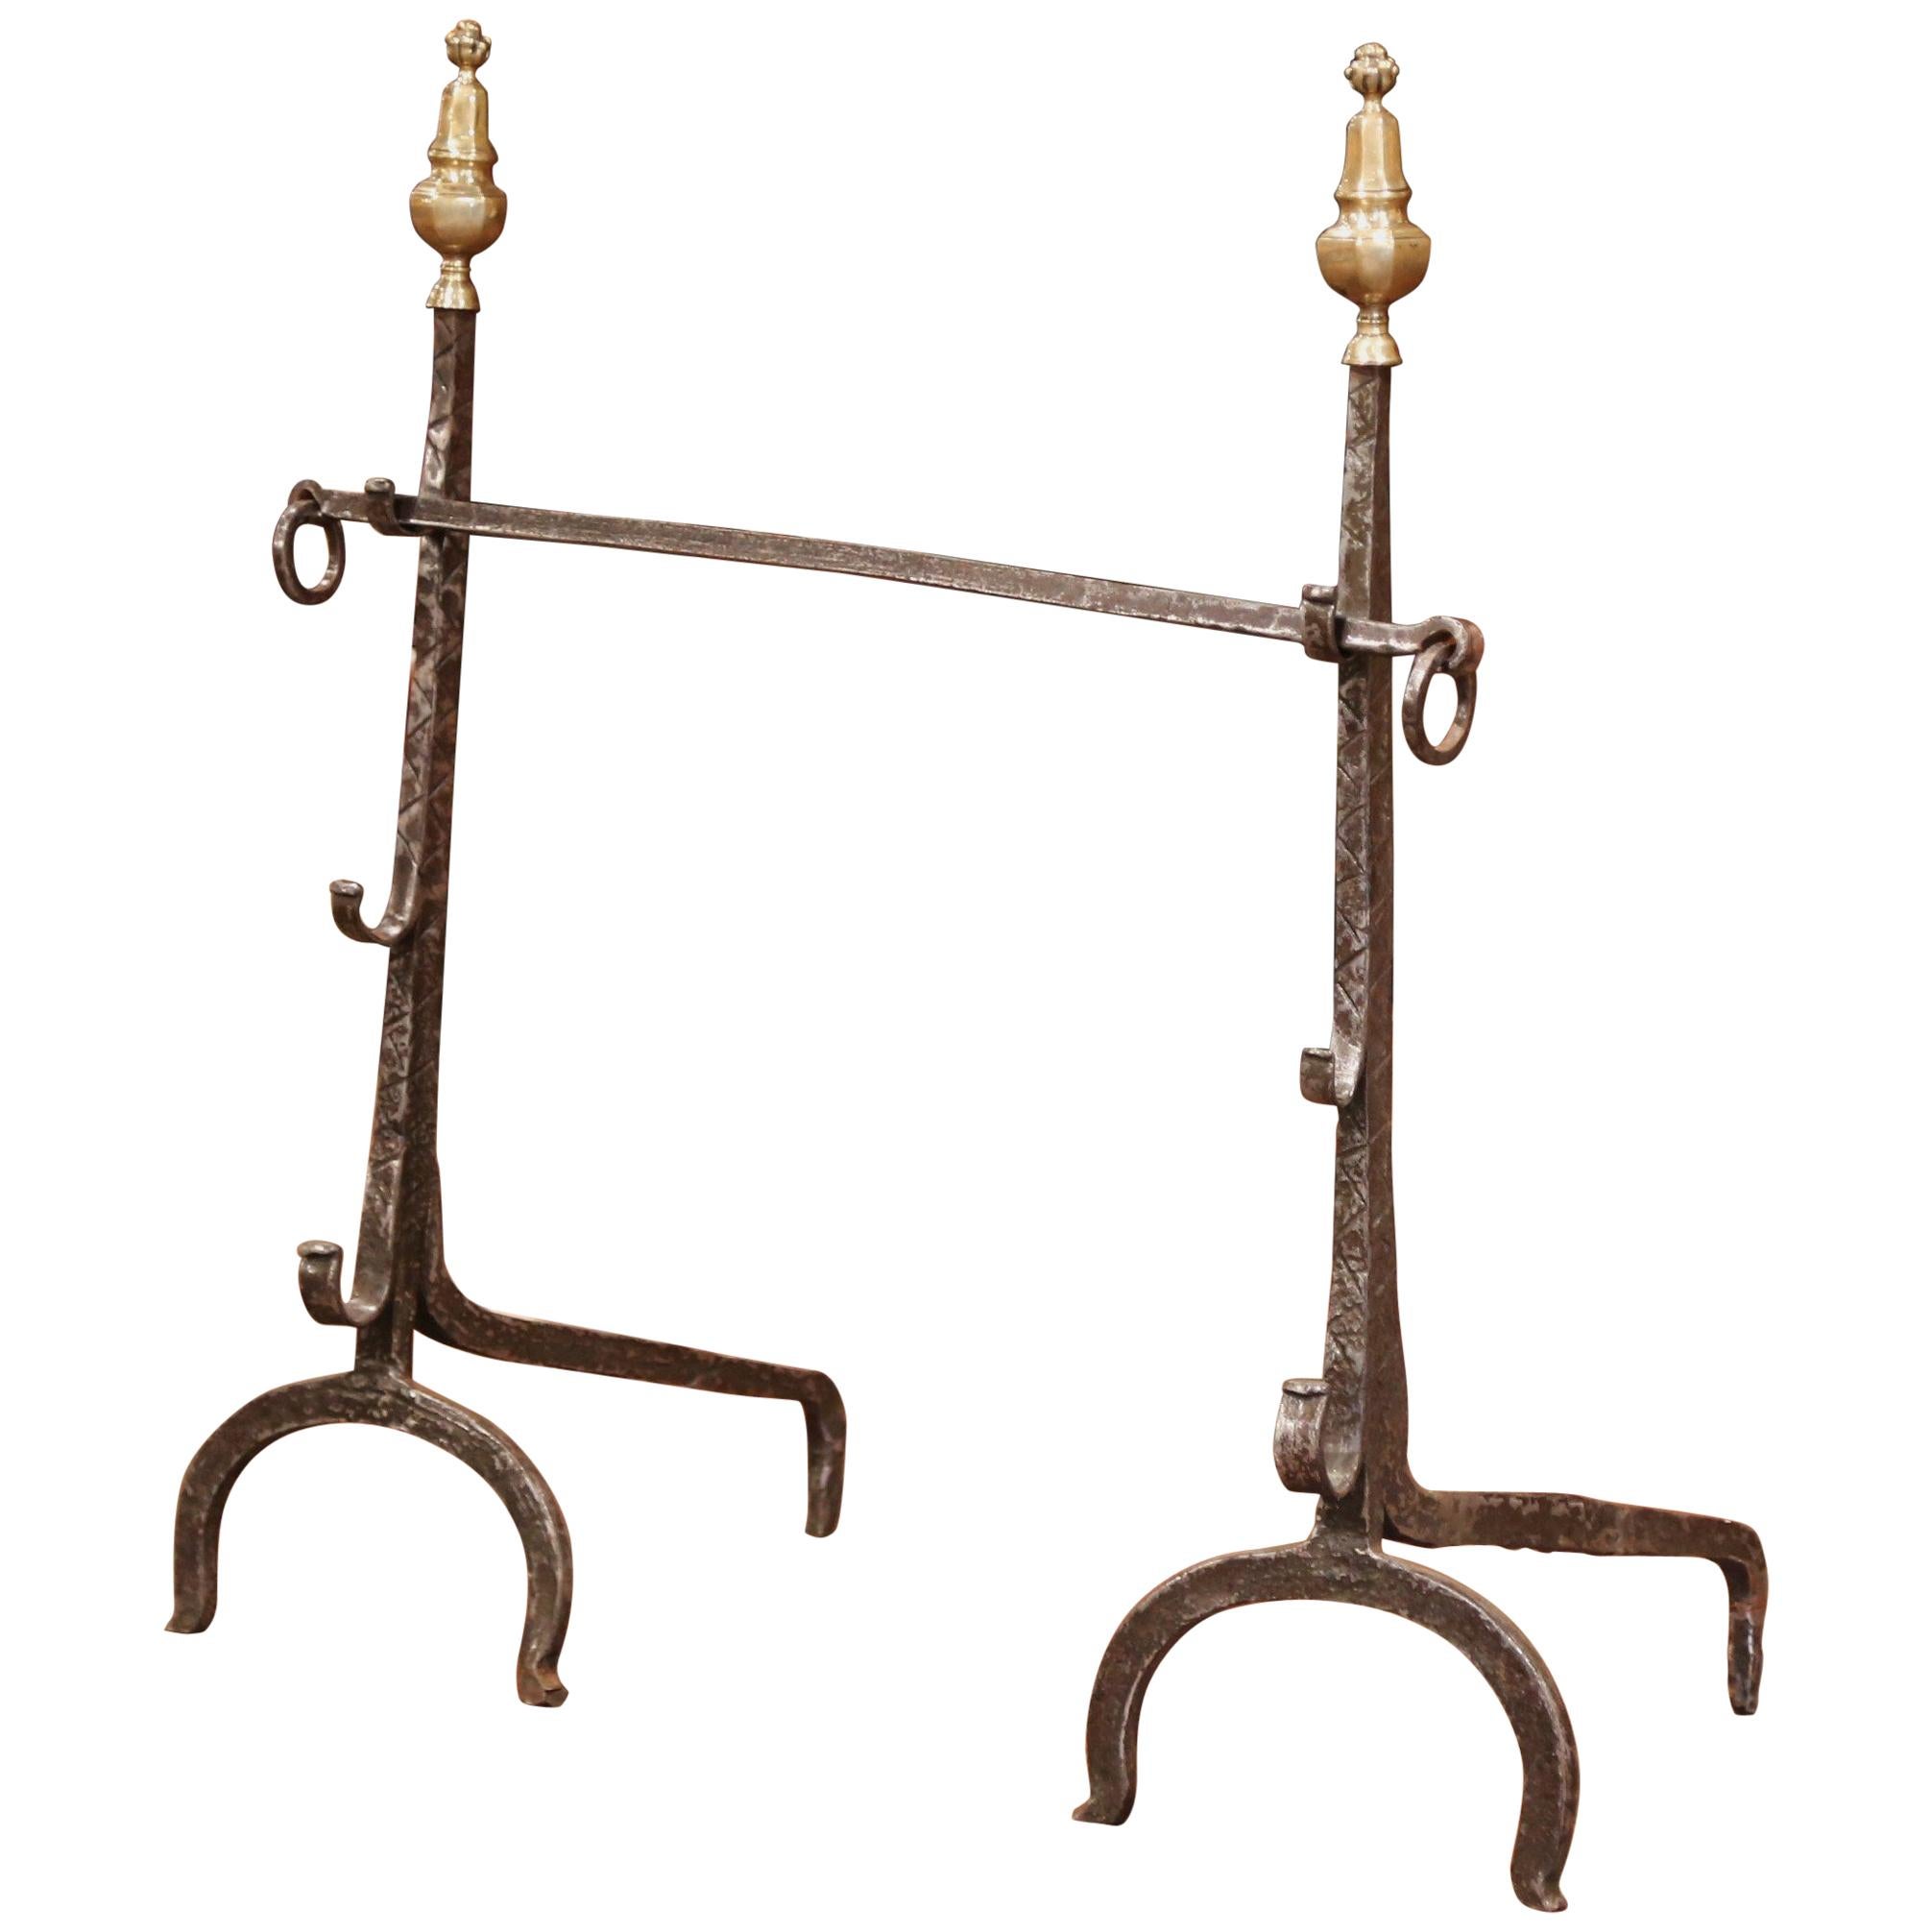 Decorate your fireplace with this tall pair of antique wrought iron andirons. Hand forged in France, circa 1680, the Classic Louis XIV fireplace essentials are embellished with decorative bronze finials at the top, and feature the original center